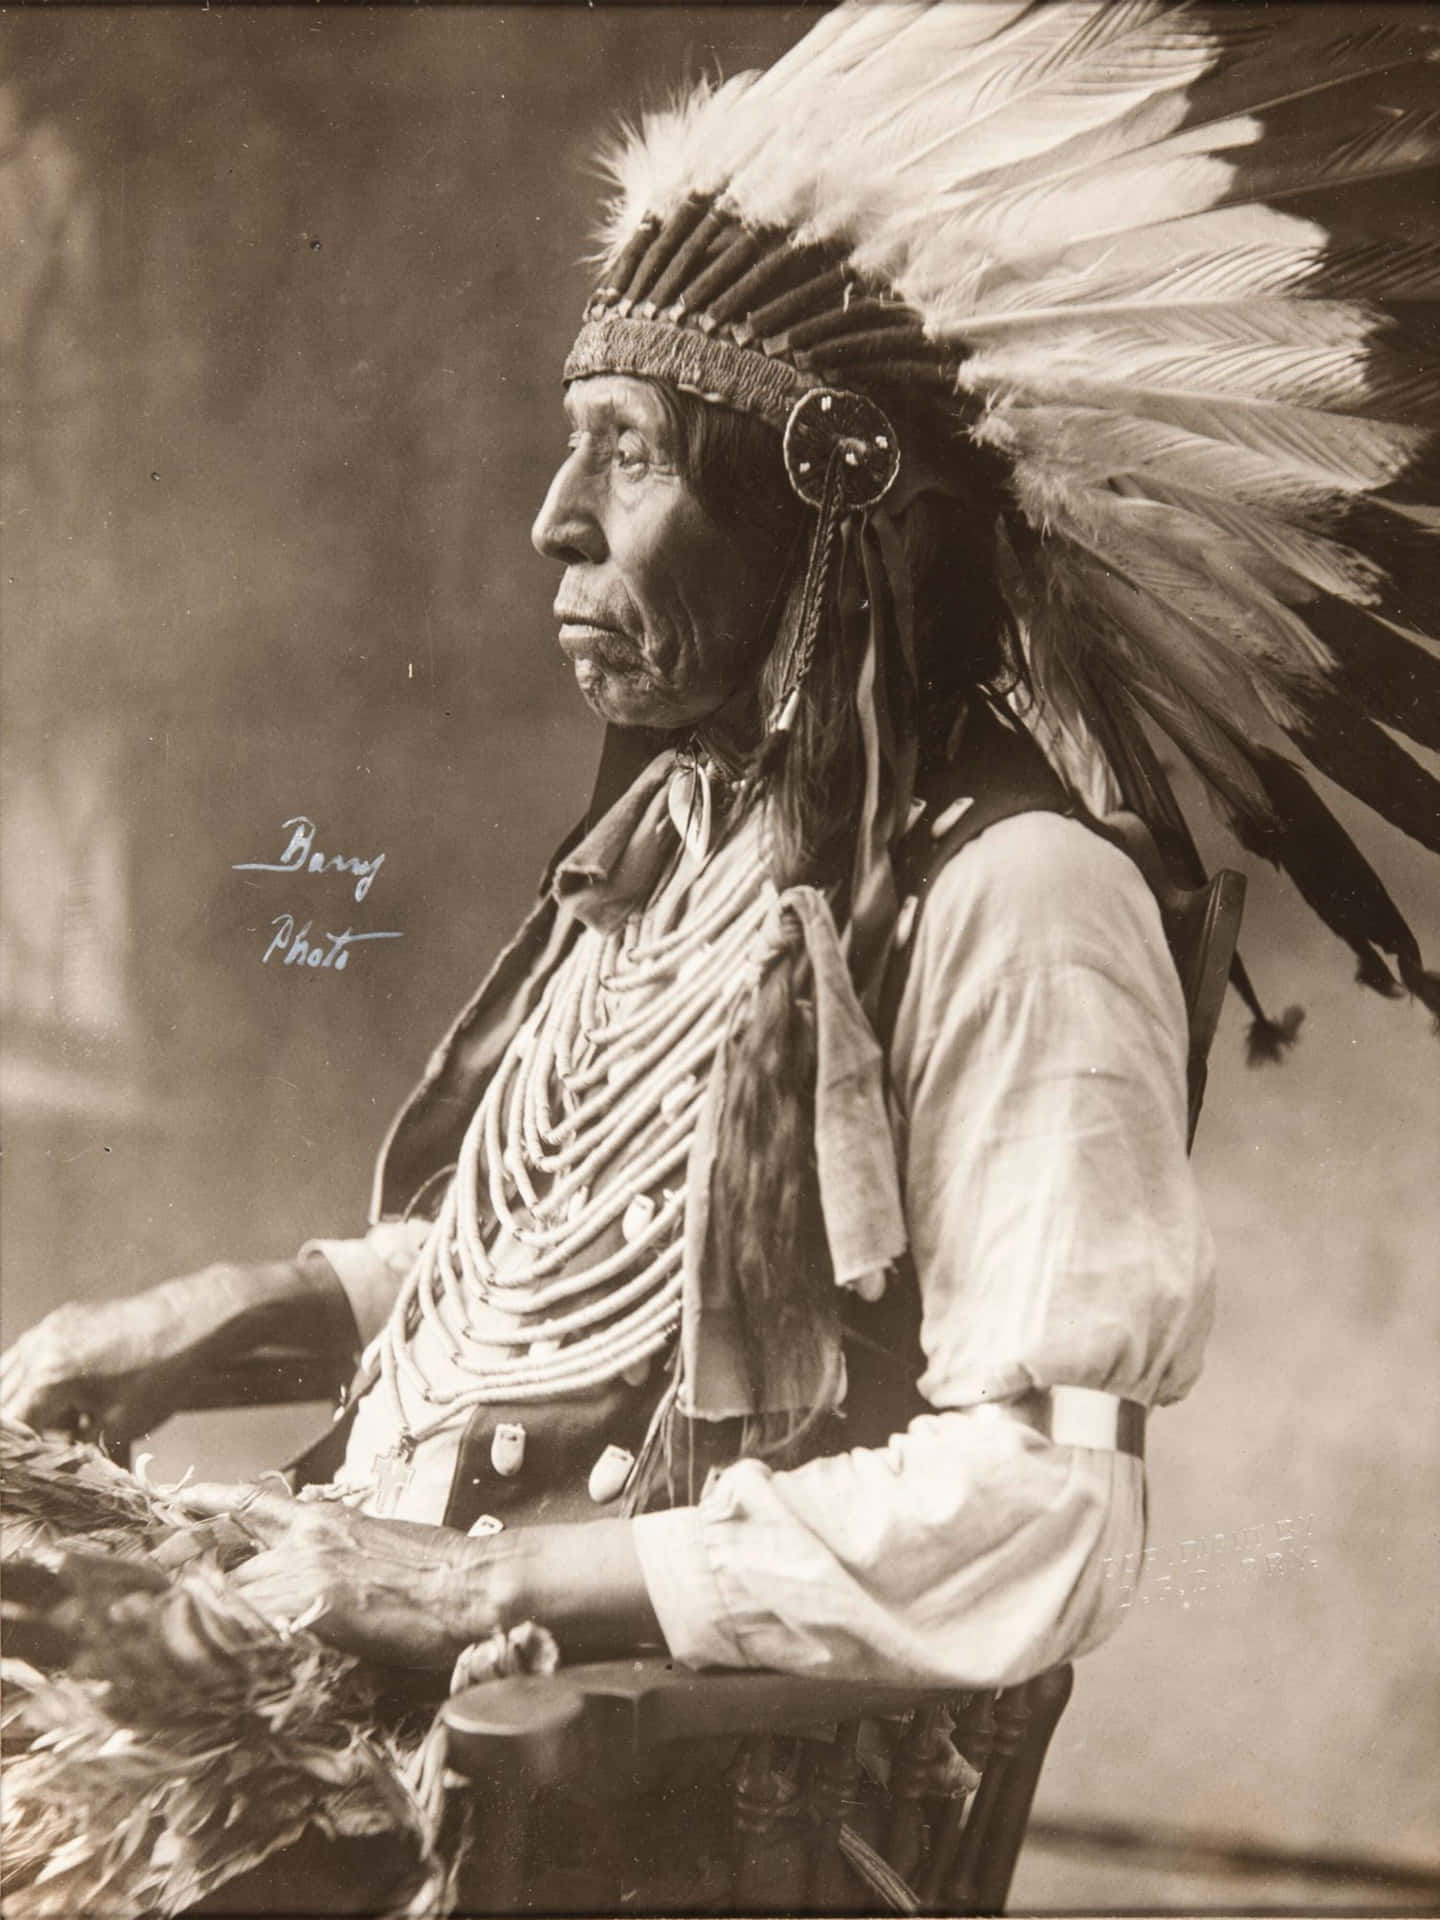 An Old Photo Of A Native American Man In A Feathered Headdress